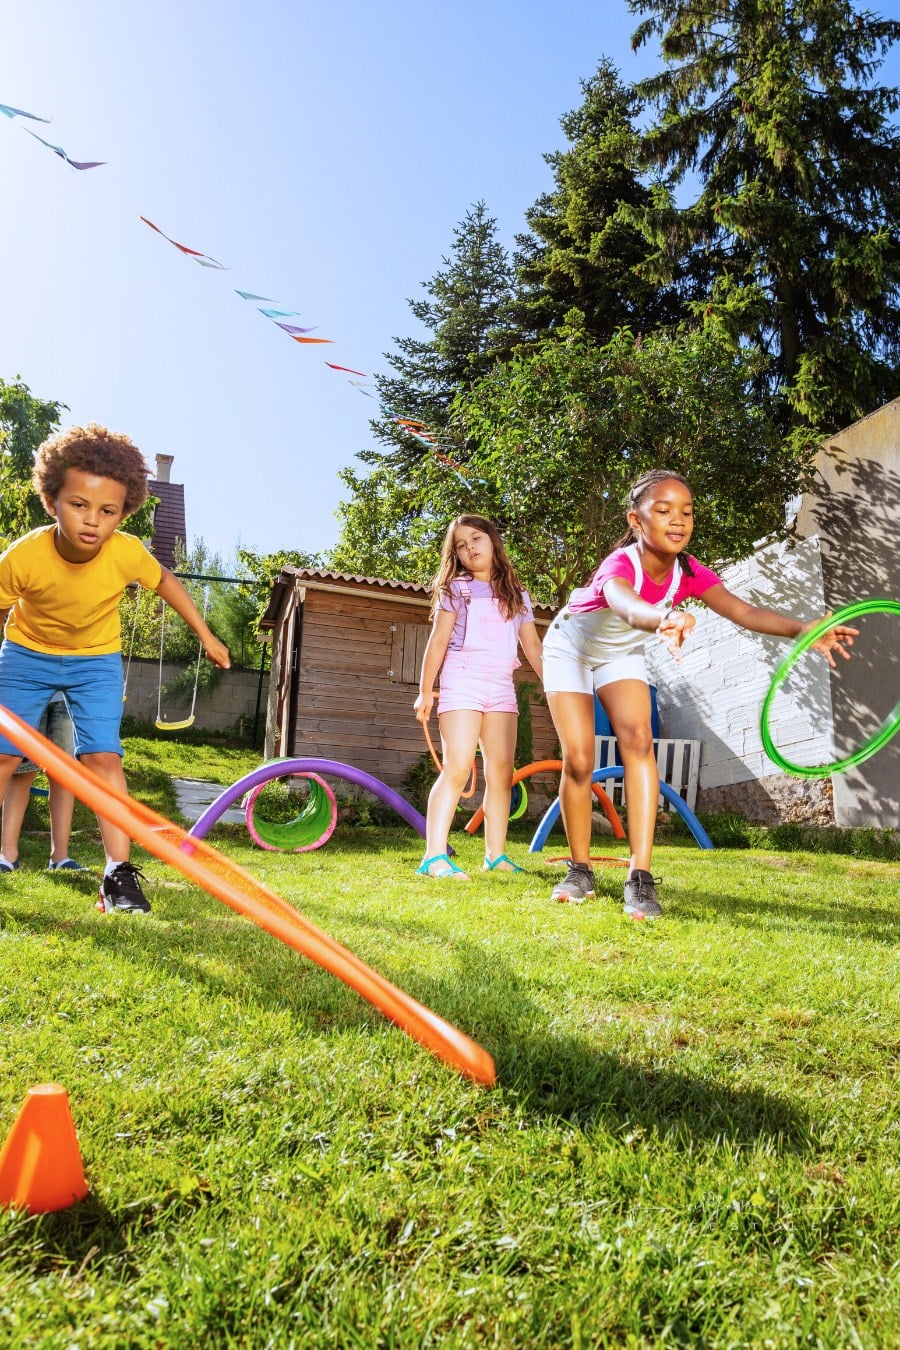 Group of Kids Playing ring toss Game with Hula hoops